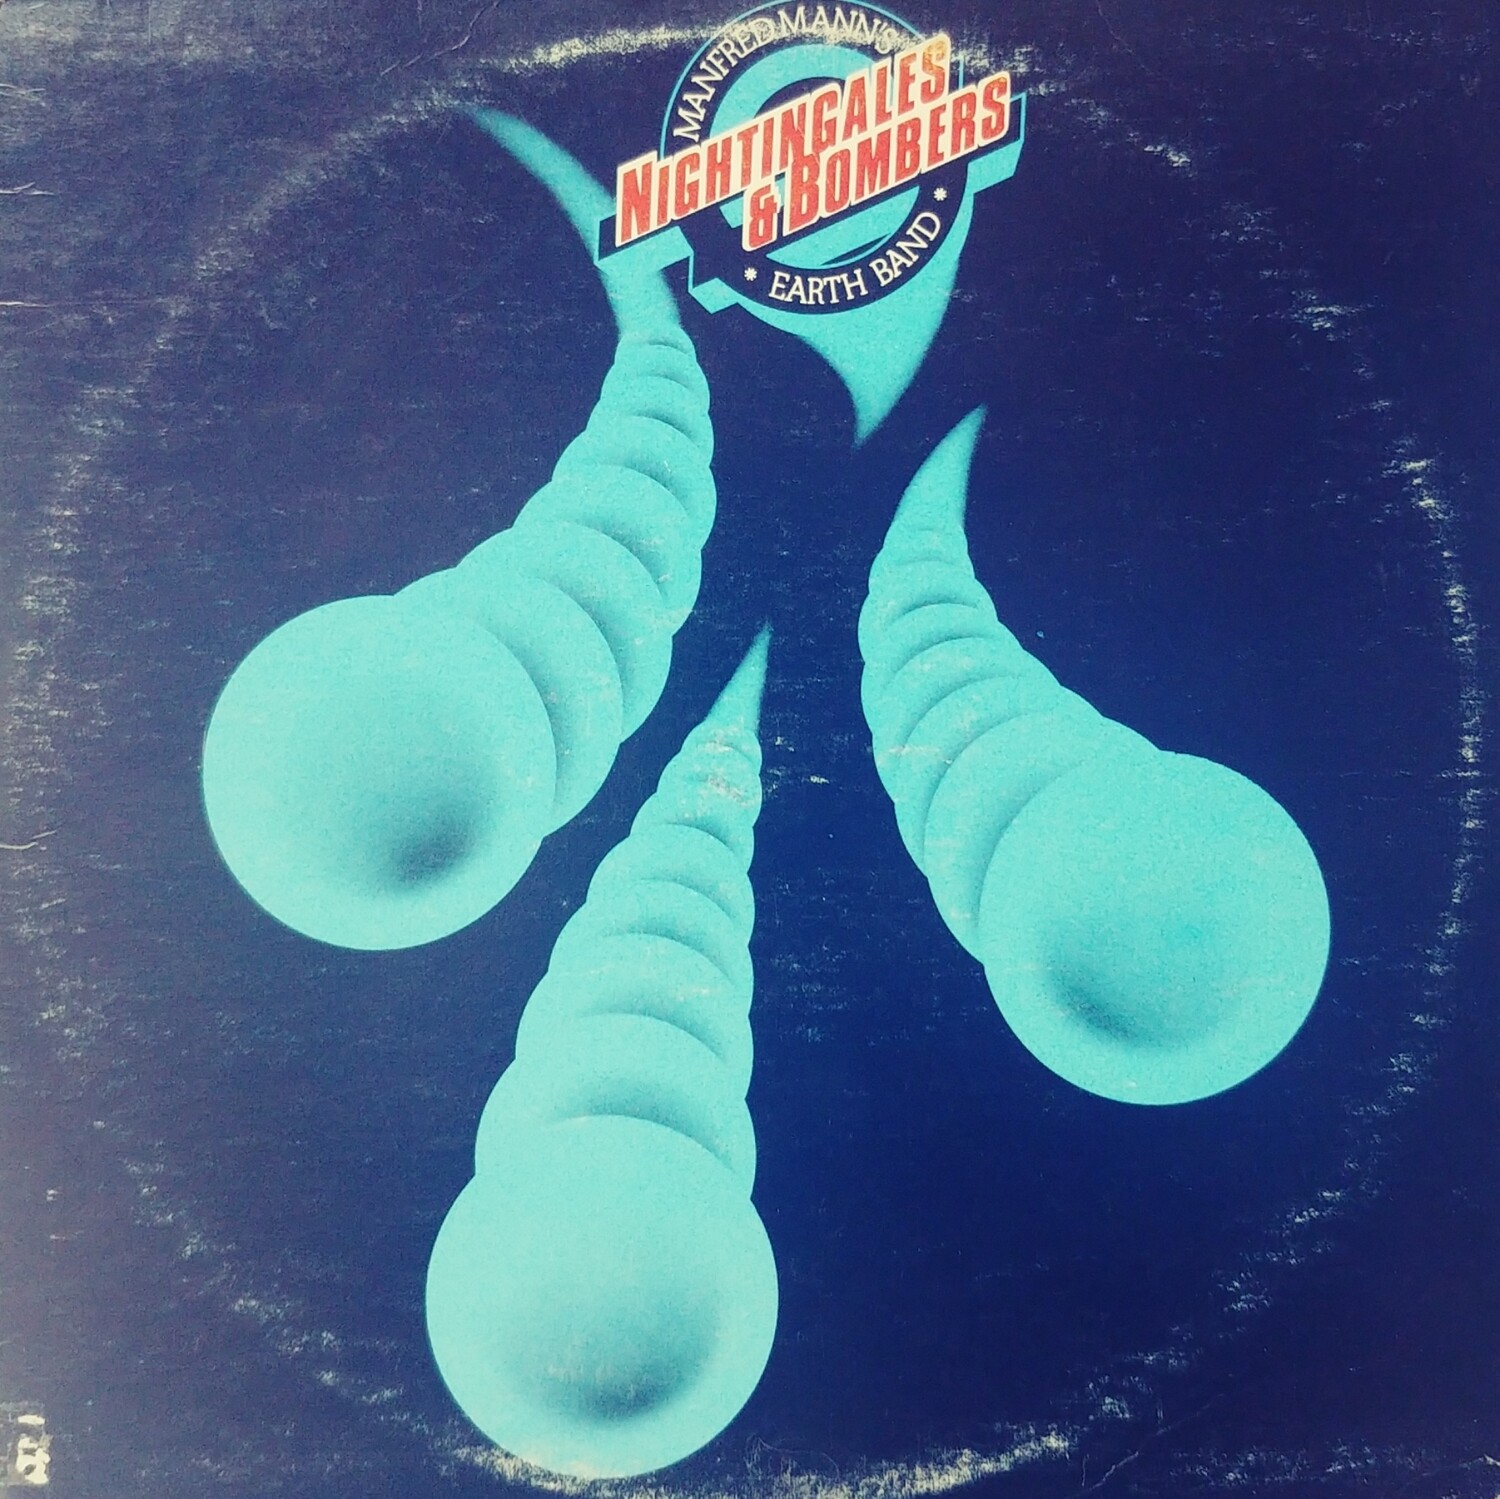 Manfred Mann's Earth Band - Nightingales and bombers